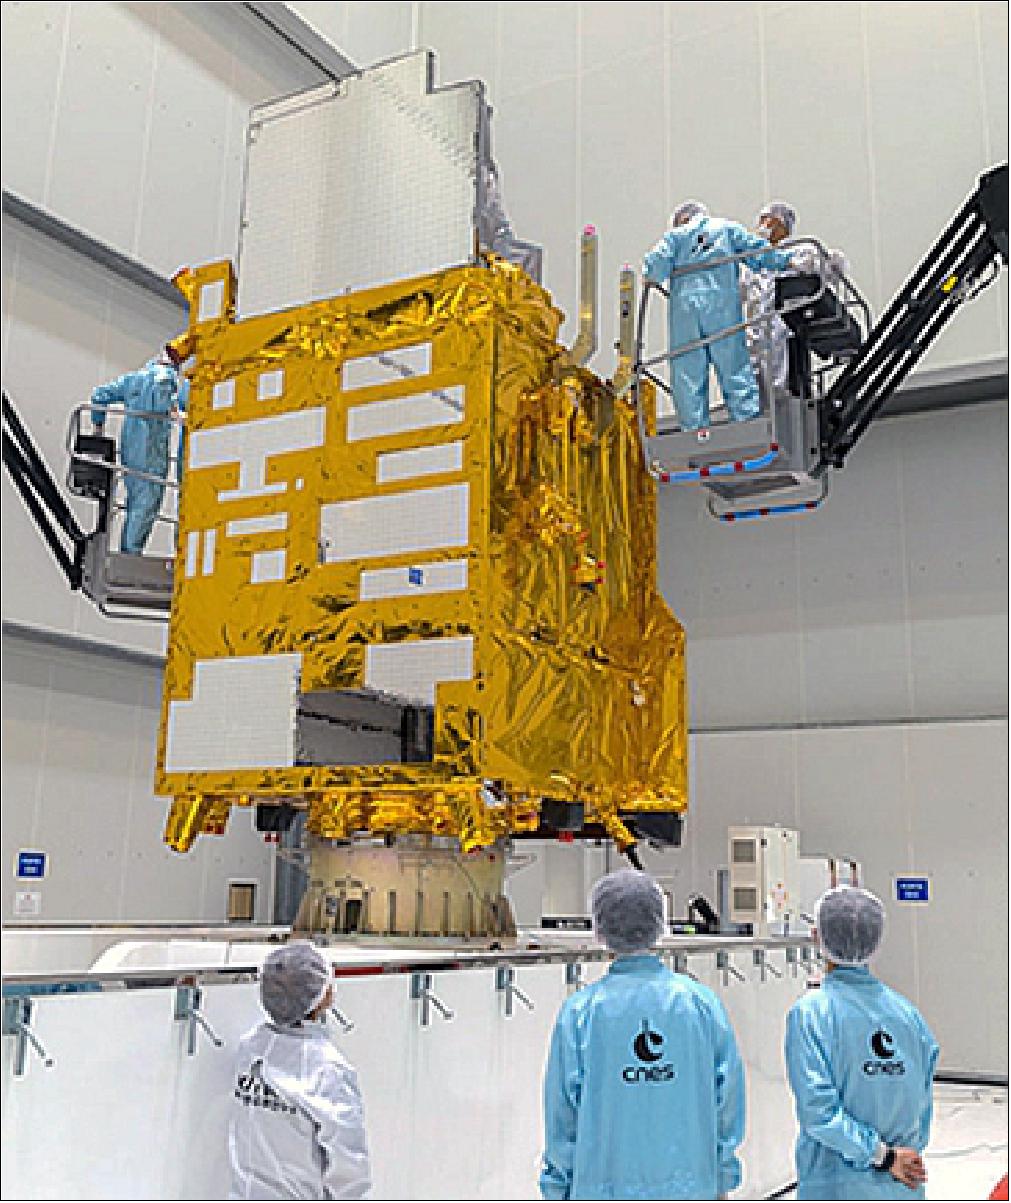 Figure 11: GEO-KOMPSAT-2A begins its processing in the Spaceport’s S5 payload preparation facility (image credit: Arianespace)